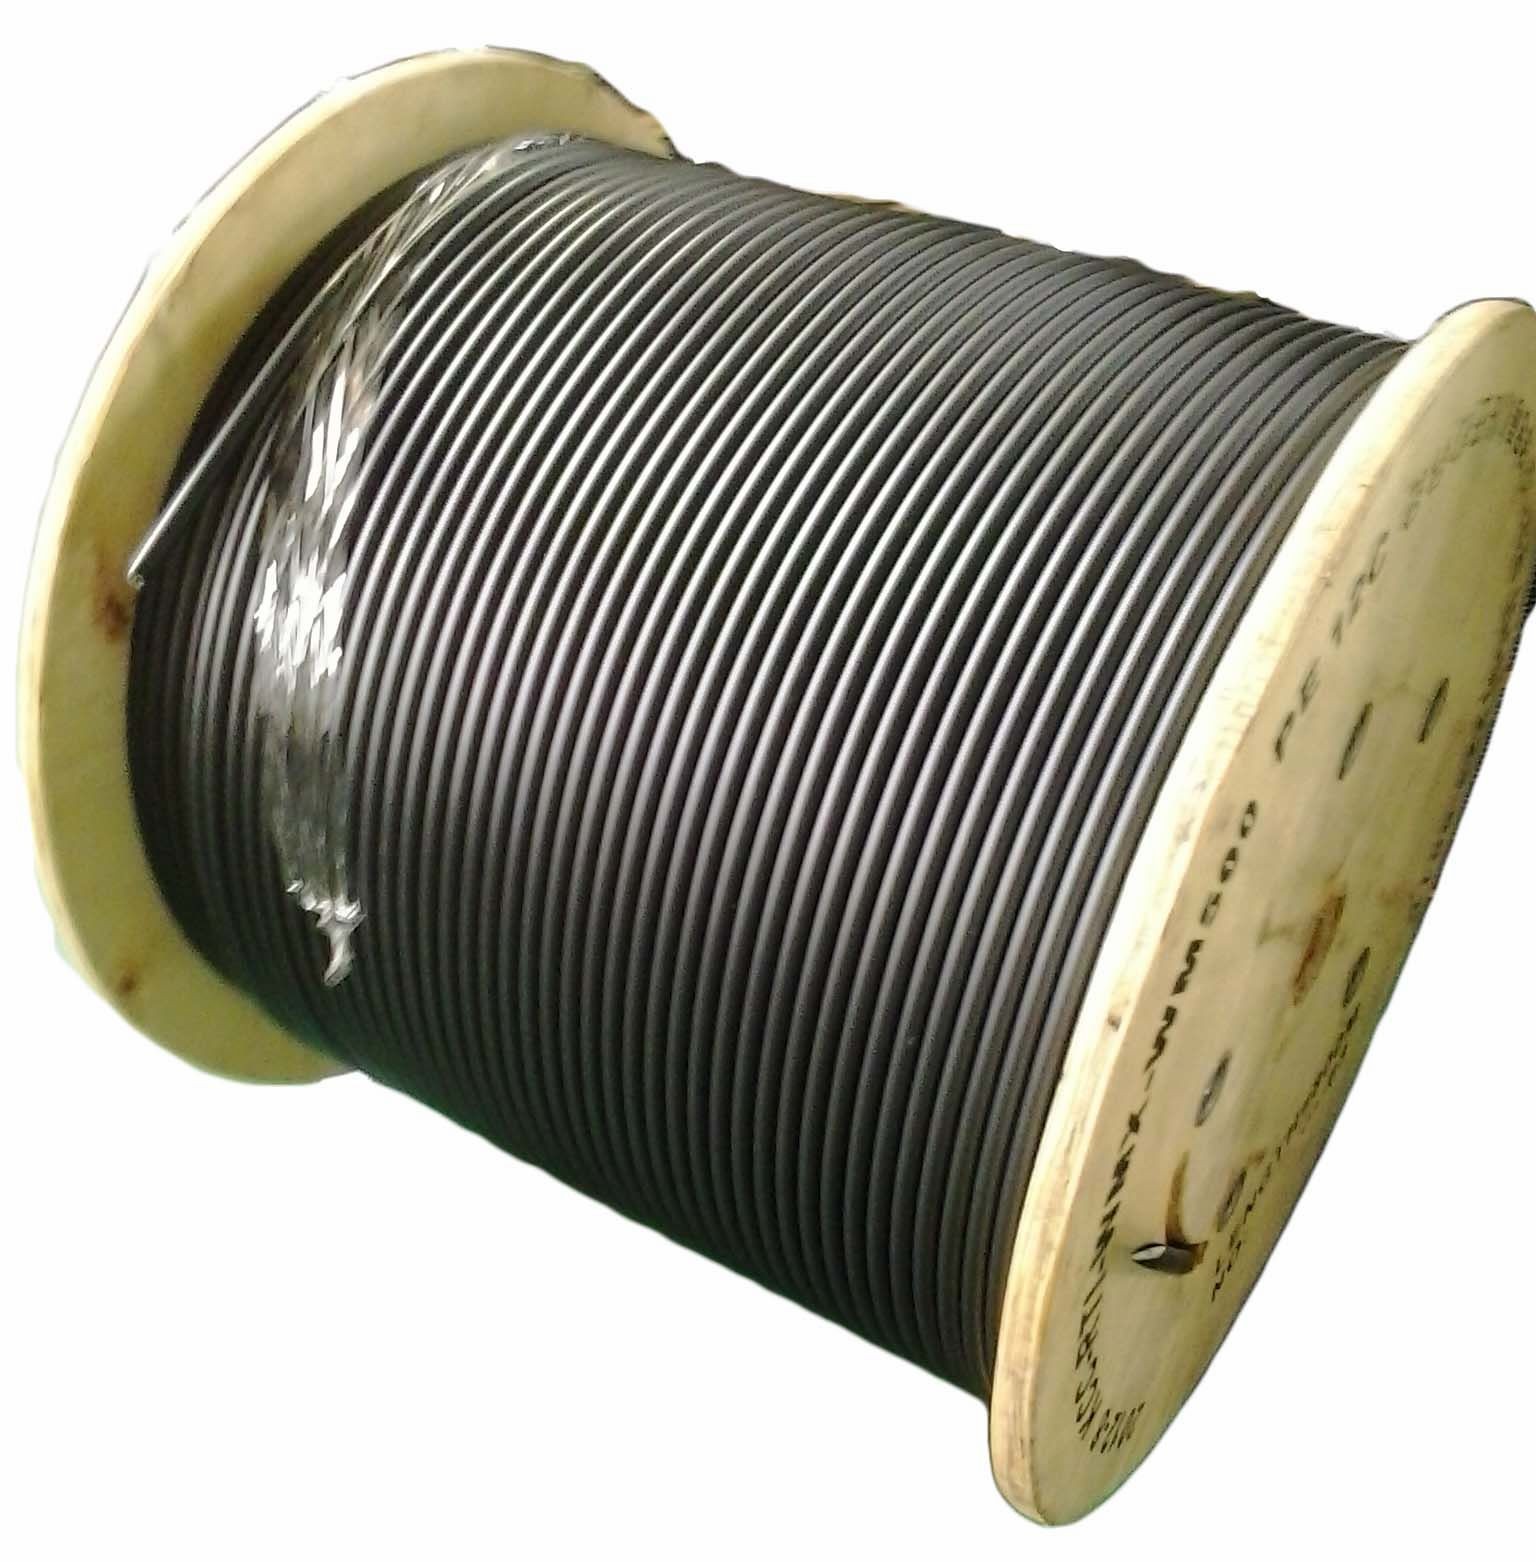  Network Cable Trunking Coaxial Cable 565 Asphalt Or Flooding Compound Manufactures